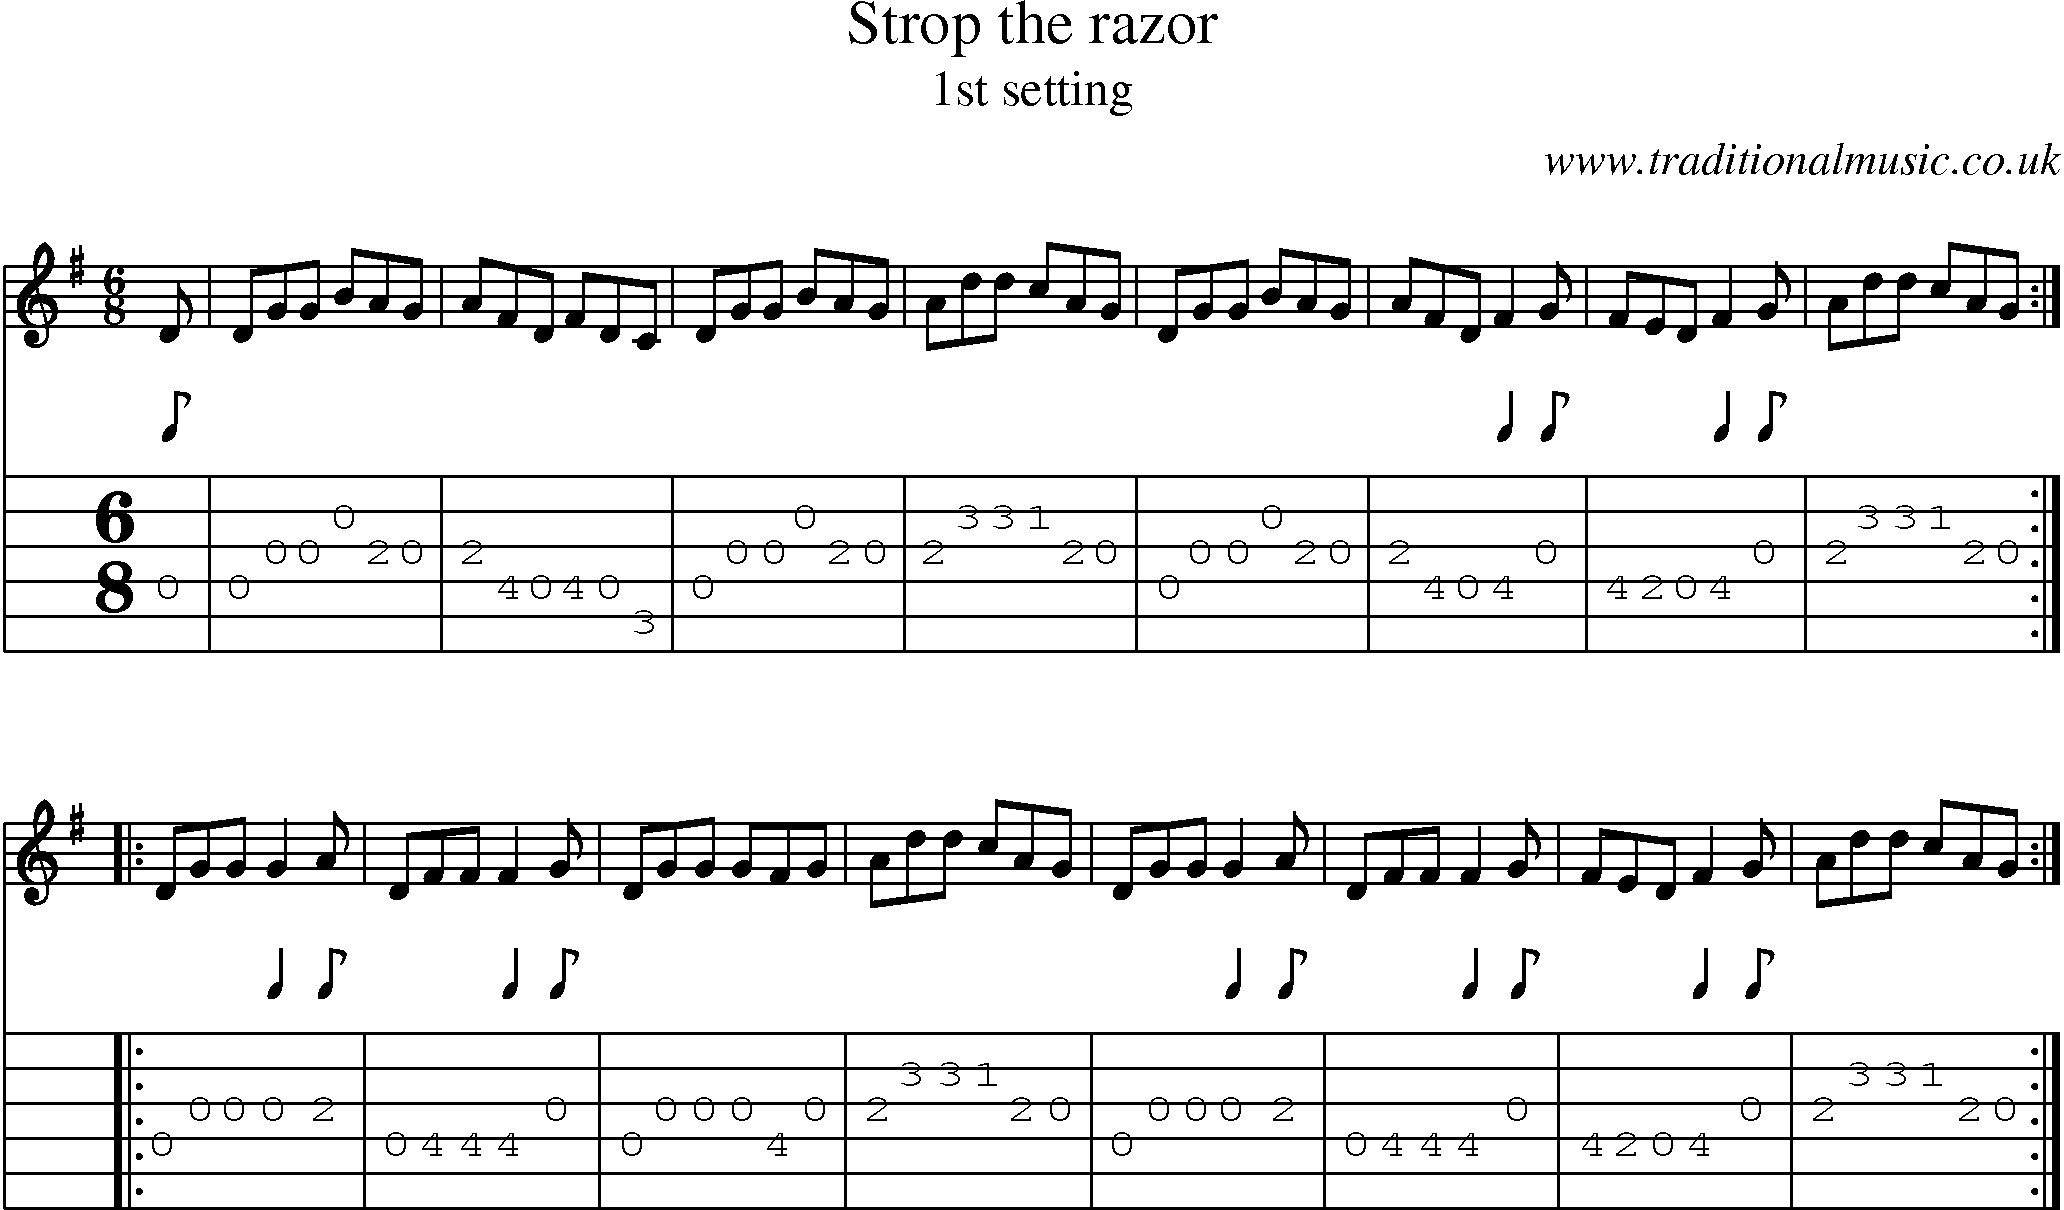 Music Score and Guitar Tabs for Strop The Razor